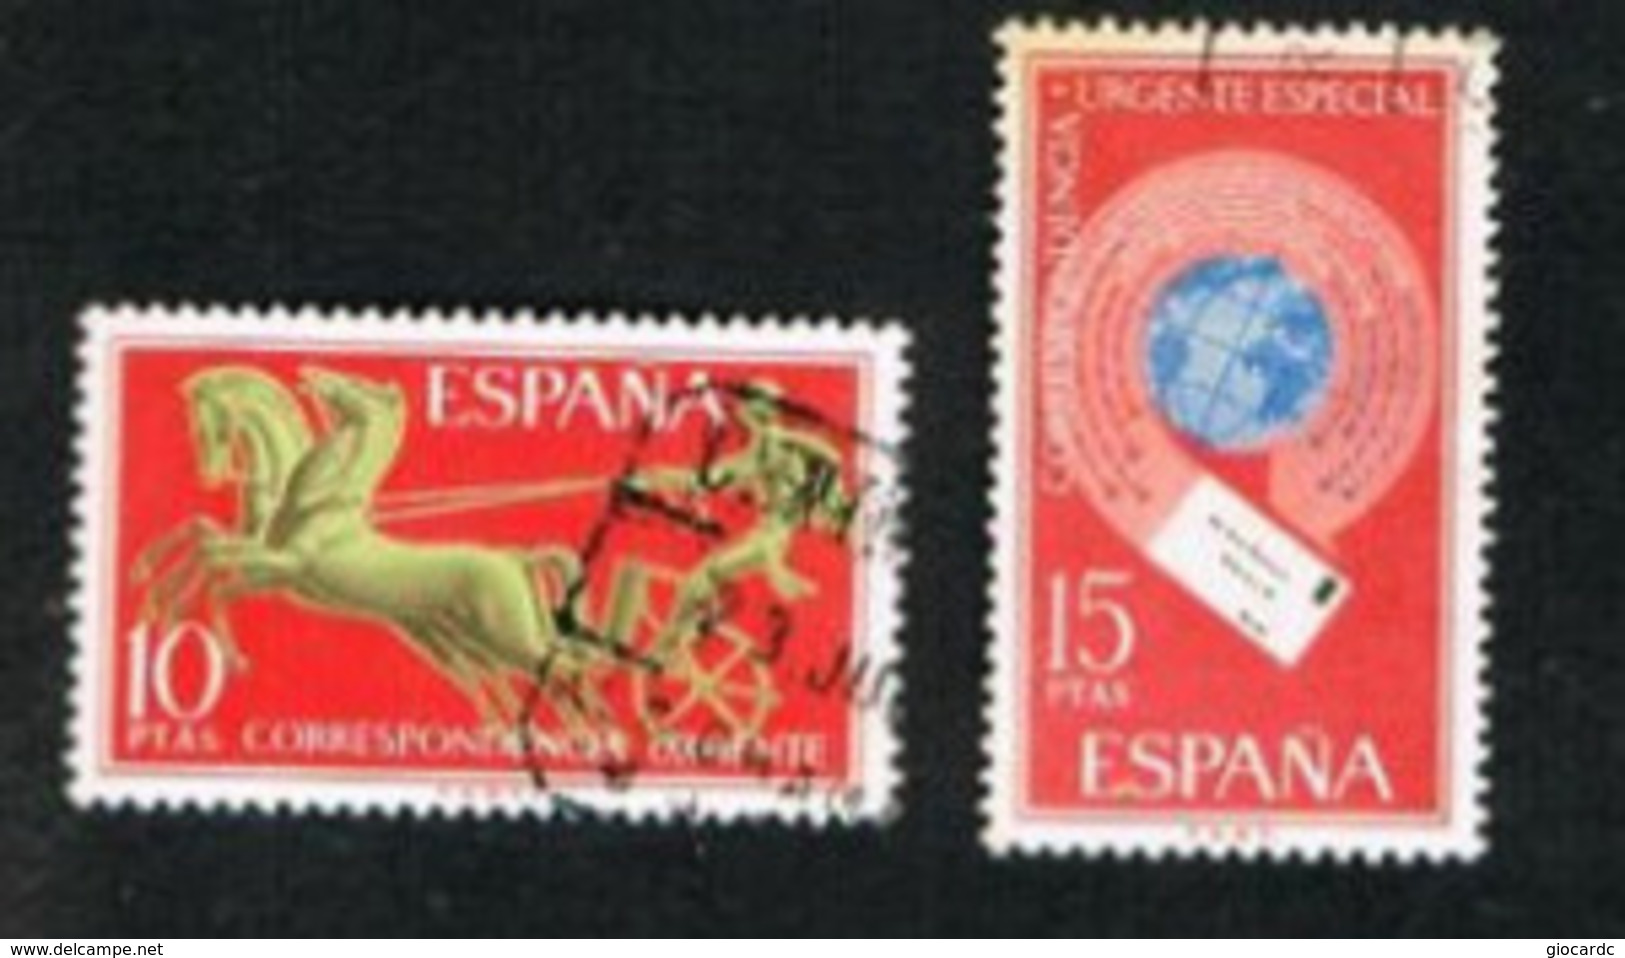 SPAGNA (SPAIN)  -  SG E2099.2100  - 1971 EXPRESS: COMPLET SET OF 2   - USED - Special Delivery